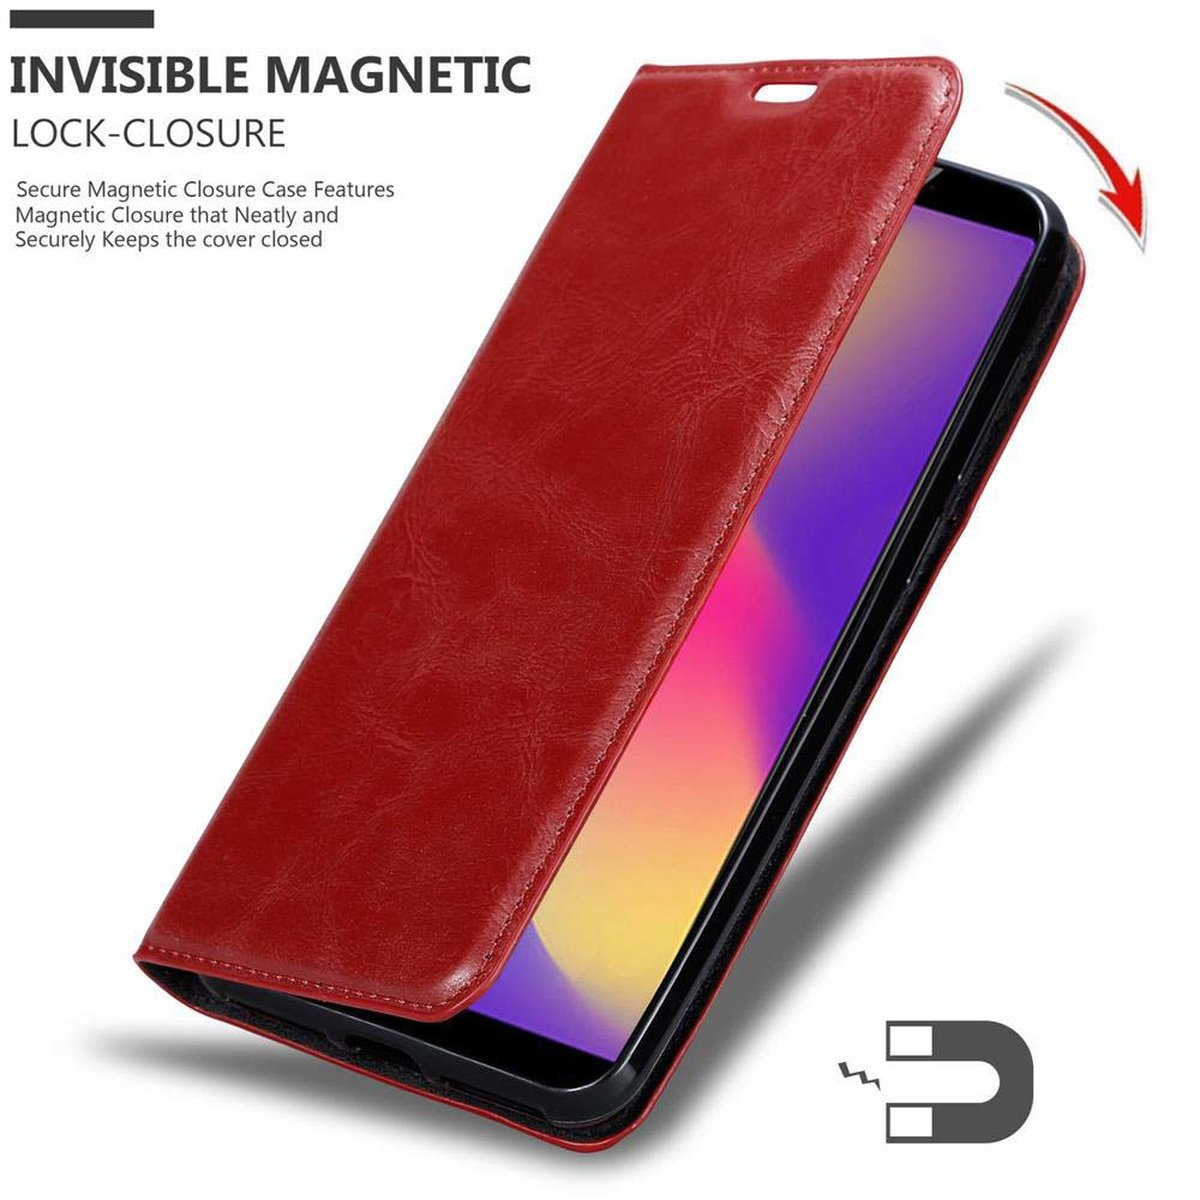 ROT N3, Book Nubia CADORABO Invisible Bookcover, APFEL ZTE, Magnet, Hülle